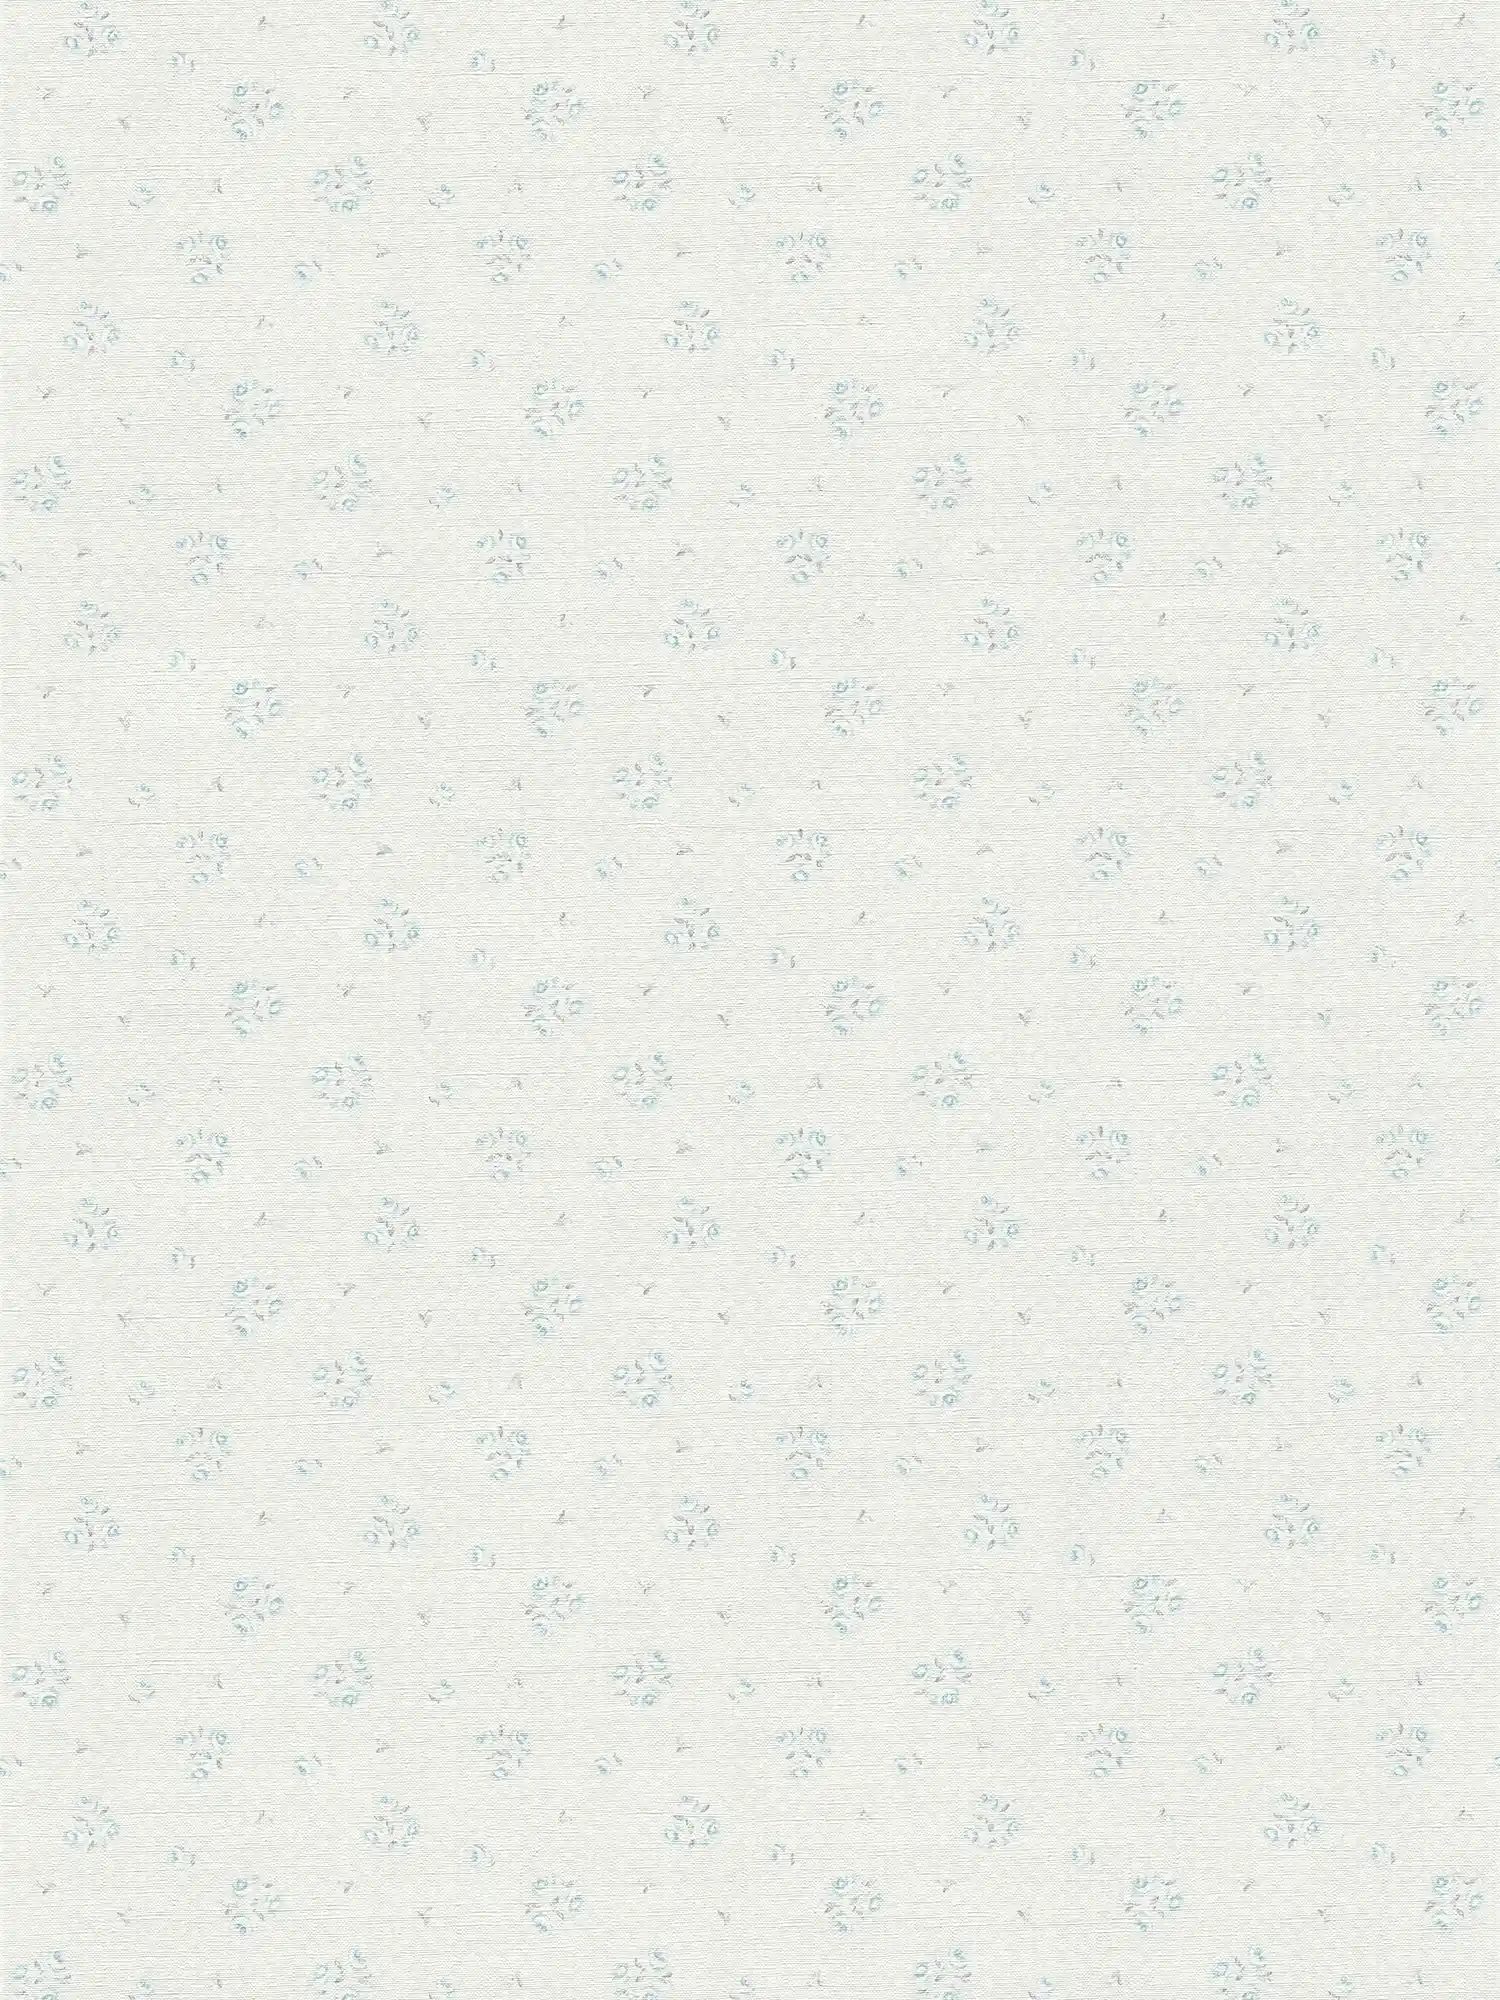 Country house wallpaper with floral pattern in Shabby Chic style - light grey, blue, white
